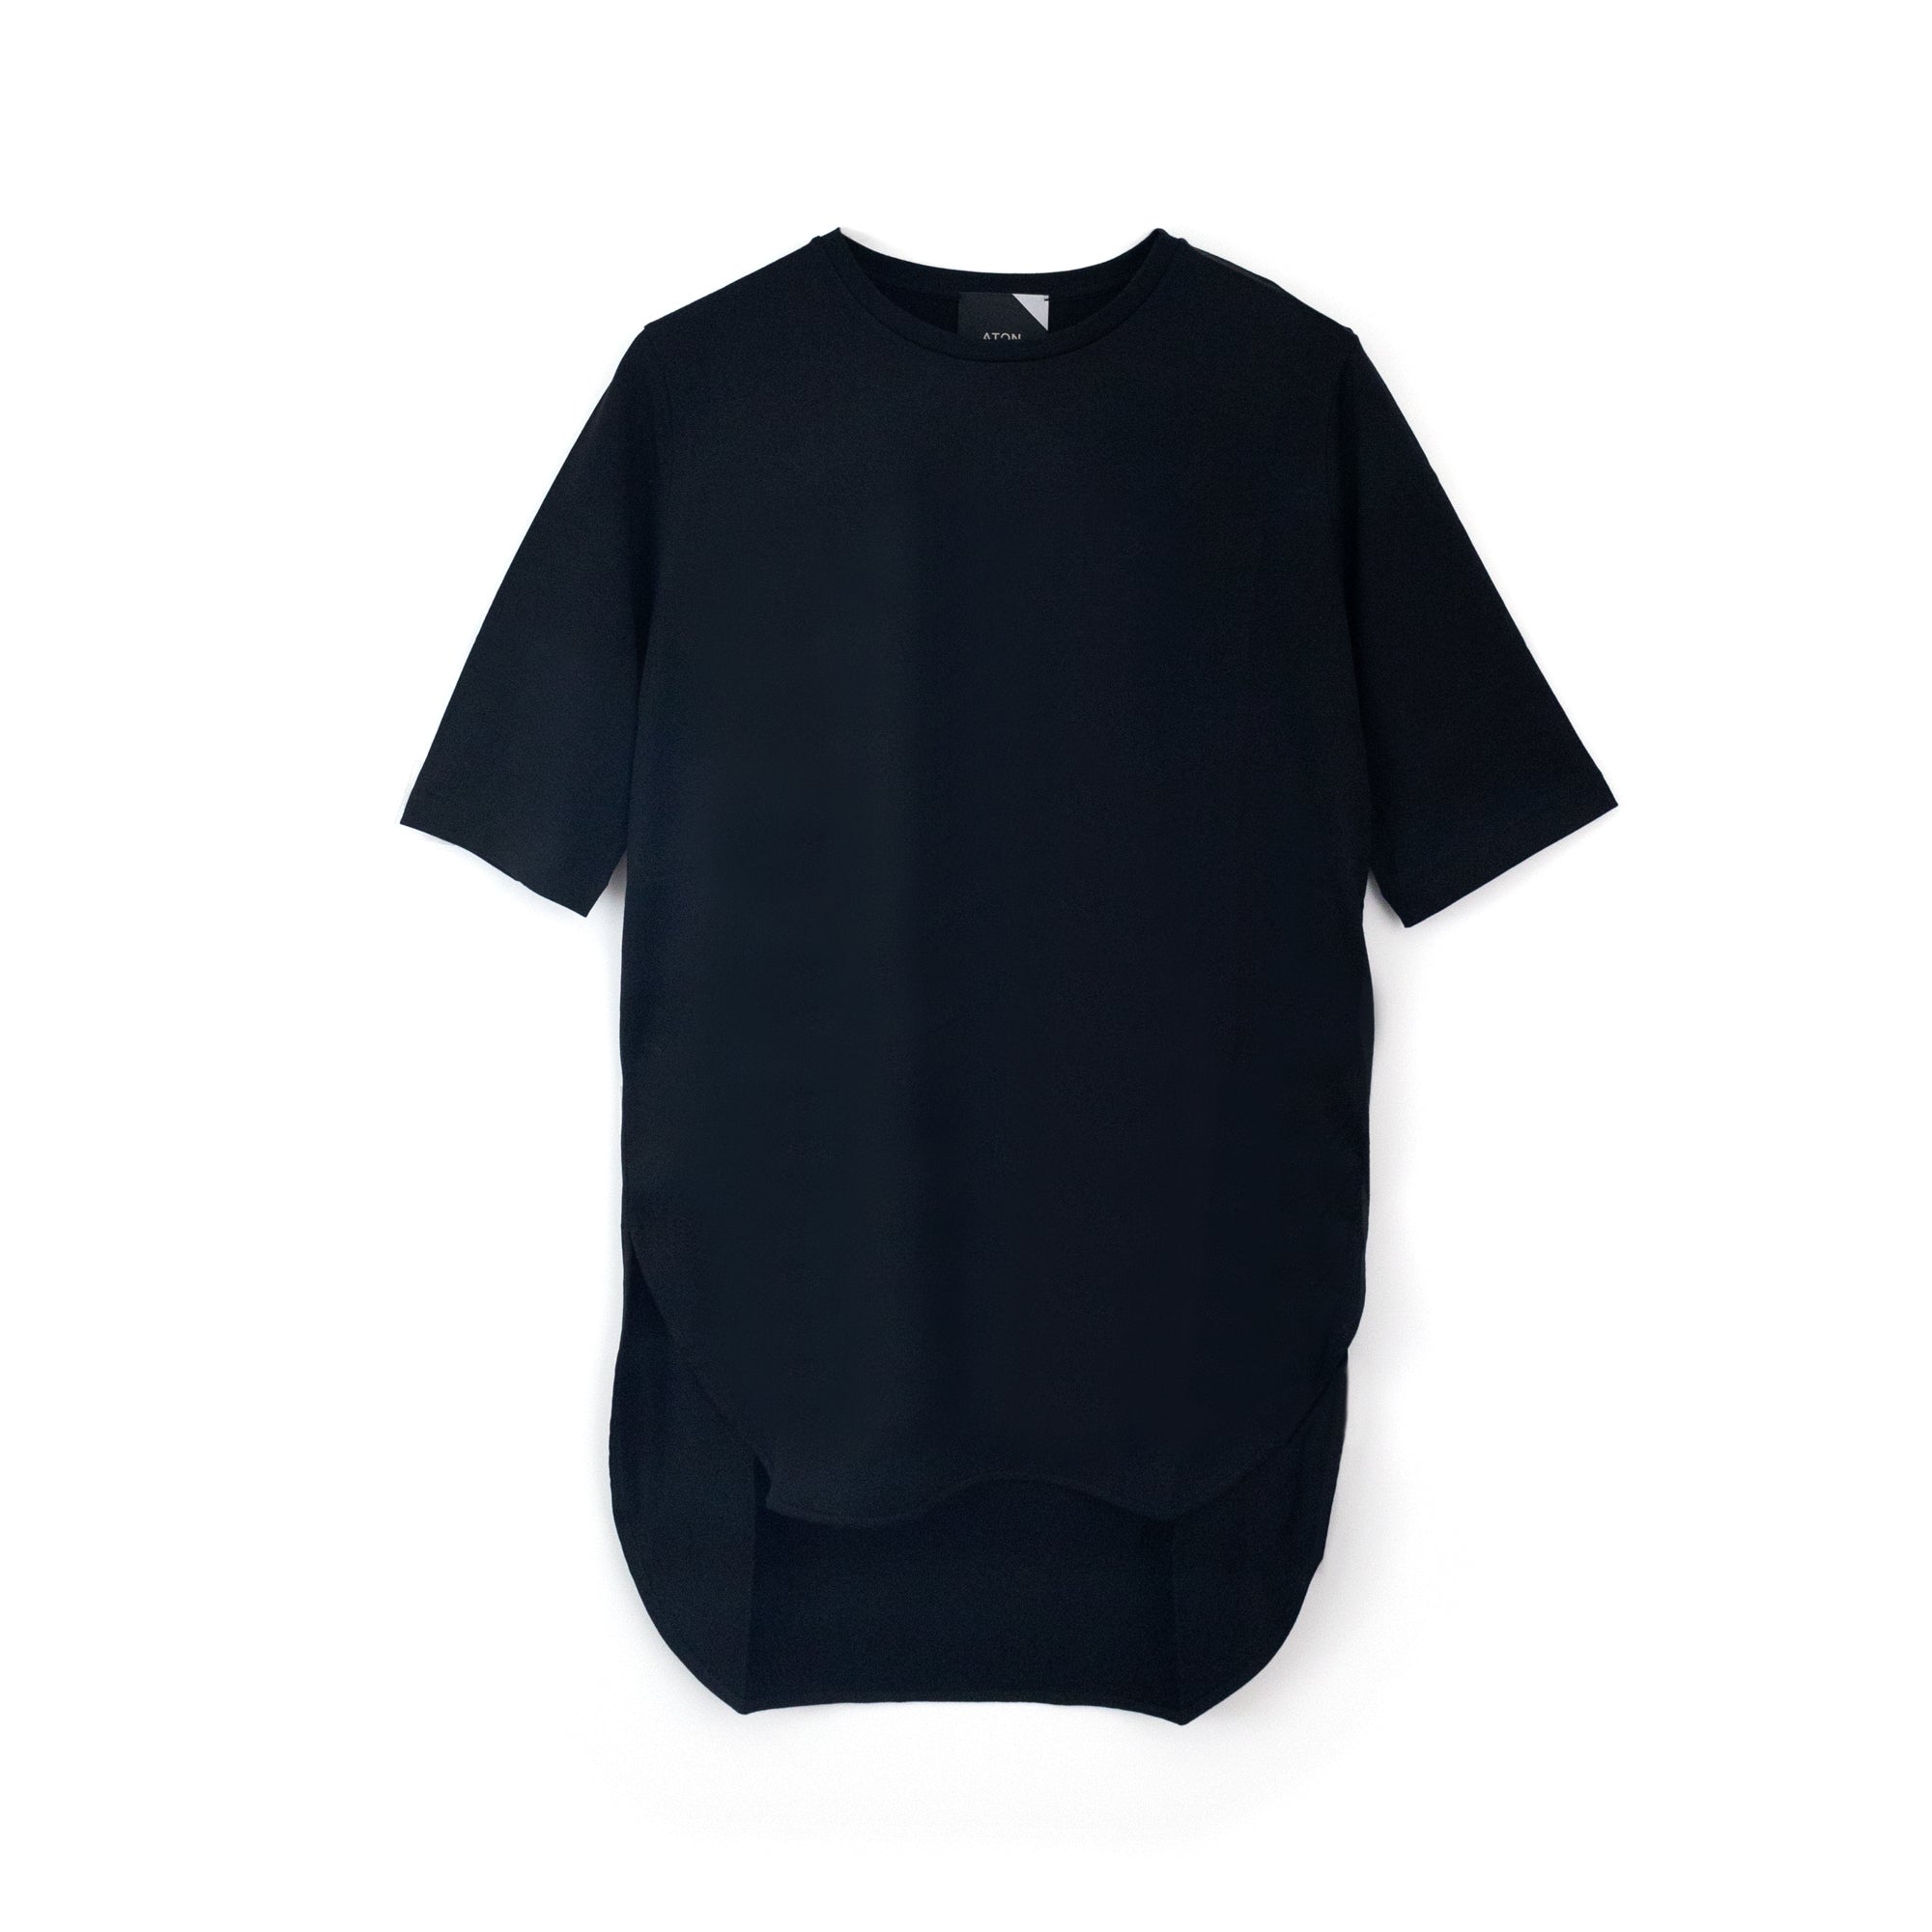 ATON SUVIN 60/2 ROUNDED HEM T BLACK ATON(エイトン） – All Things 